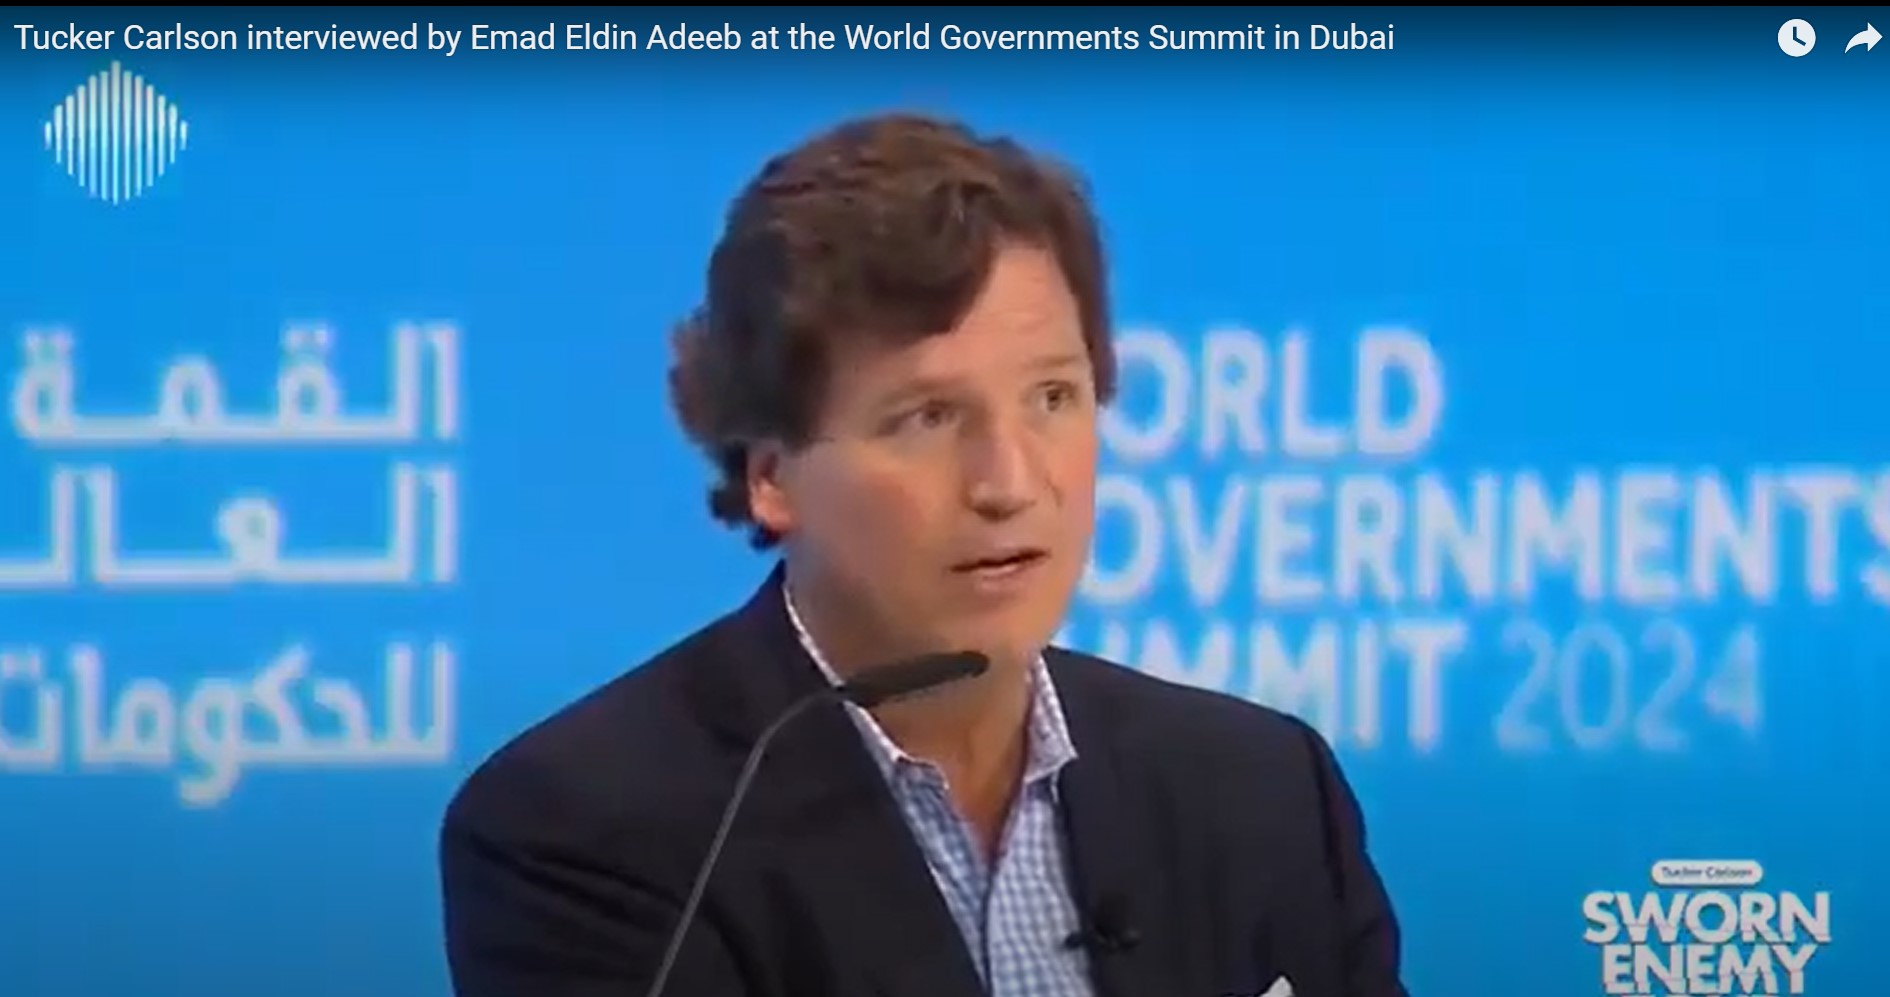 Tucker Carlson being interviewed by Emad Eldin Adeeb at the World Governments Summit in Dubai.